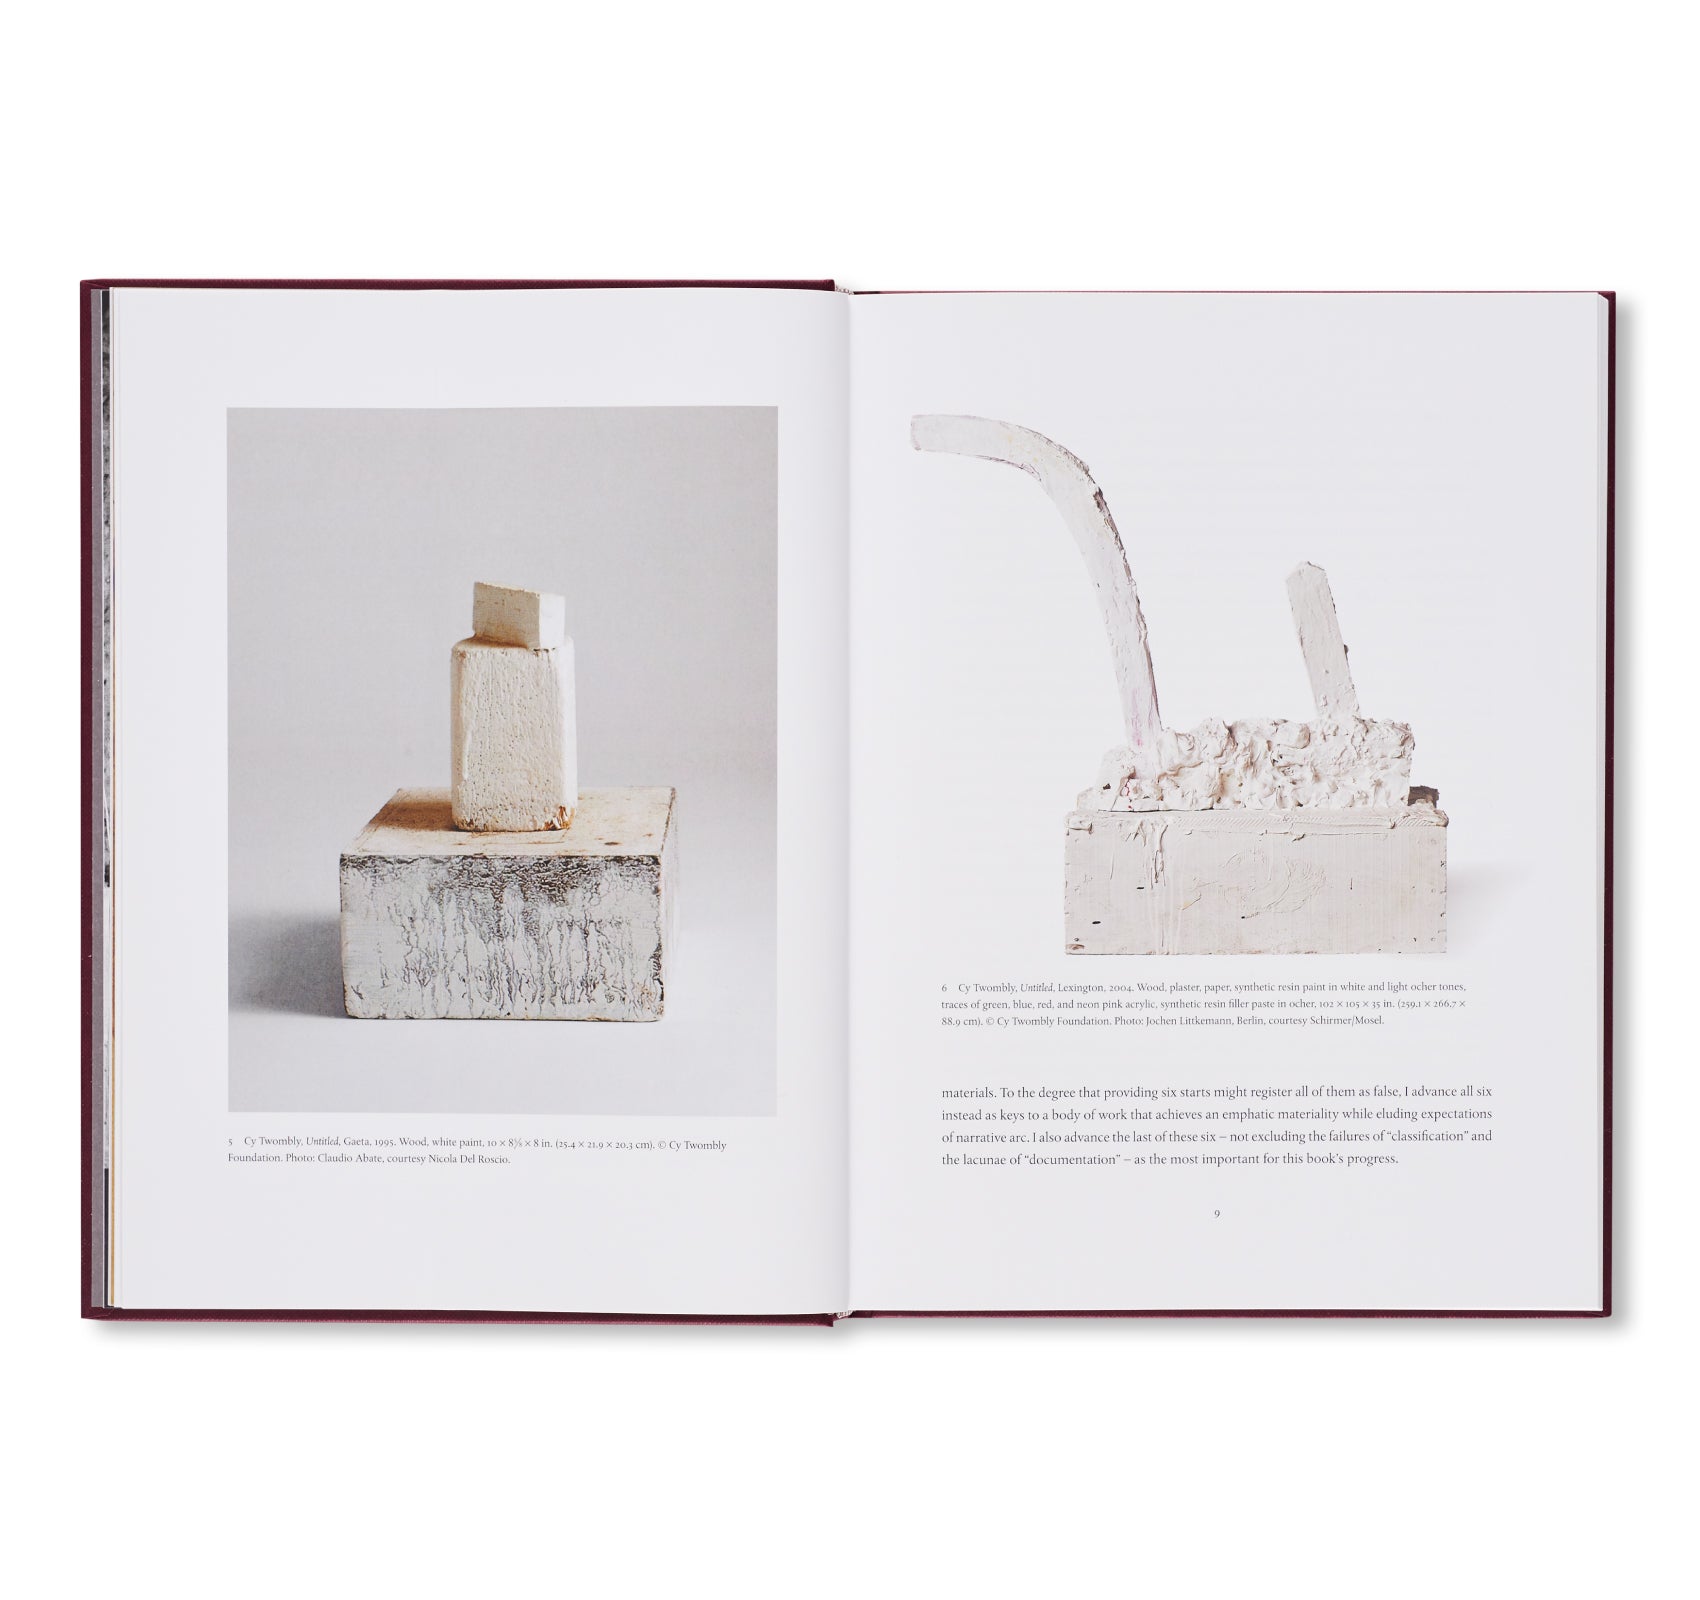 CY TWOMBLY'S THINGS by Kate Nesin – twelvebooks